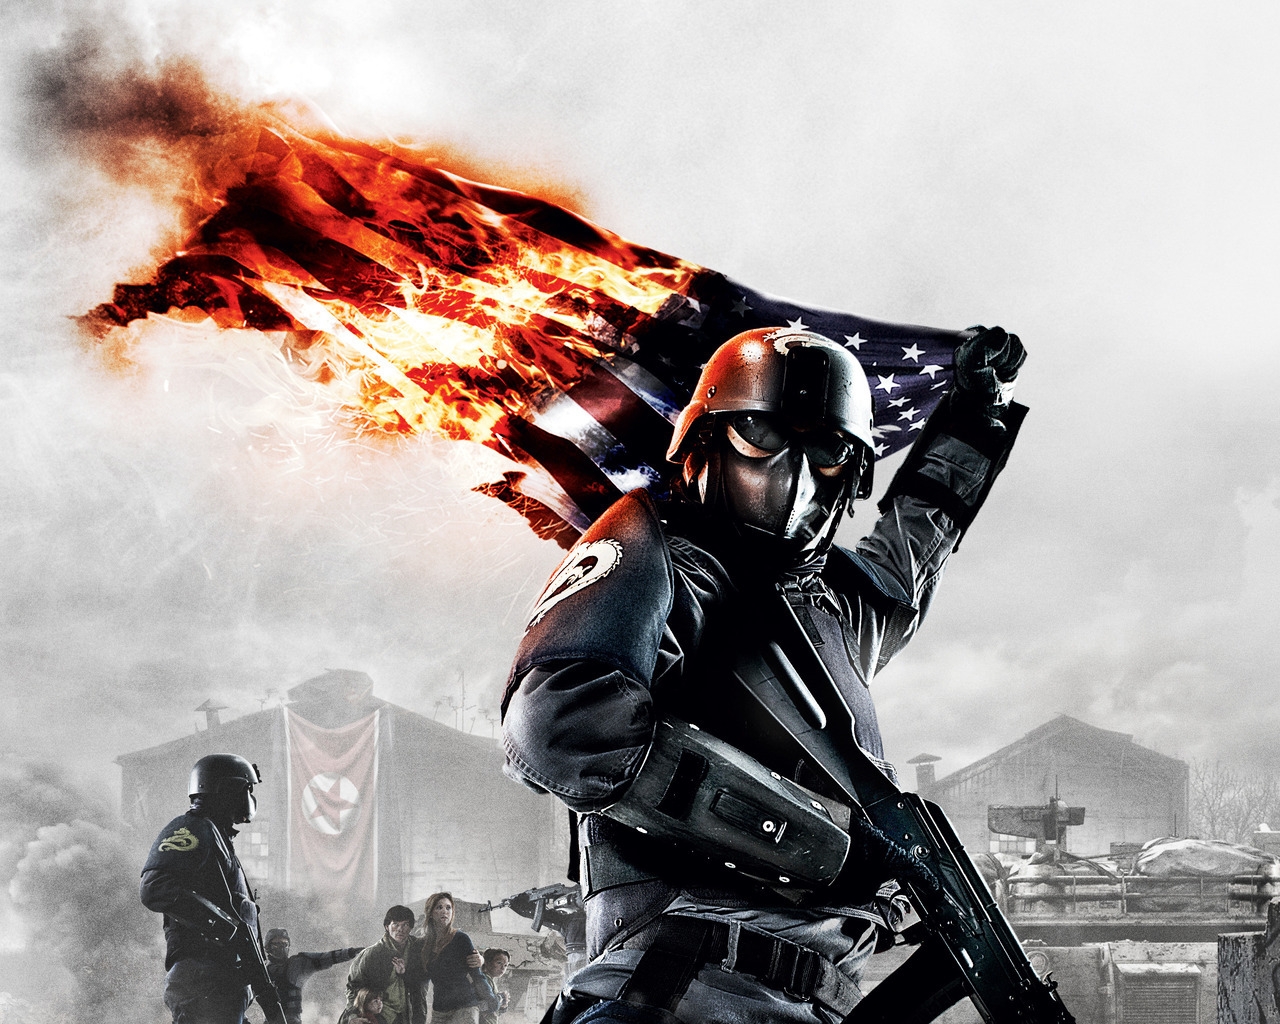 Homefront for 1280 x 1024 resolution